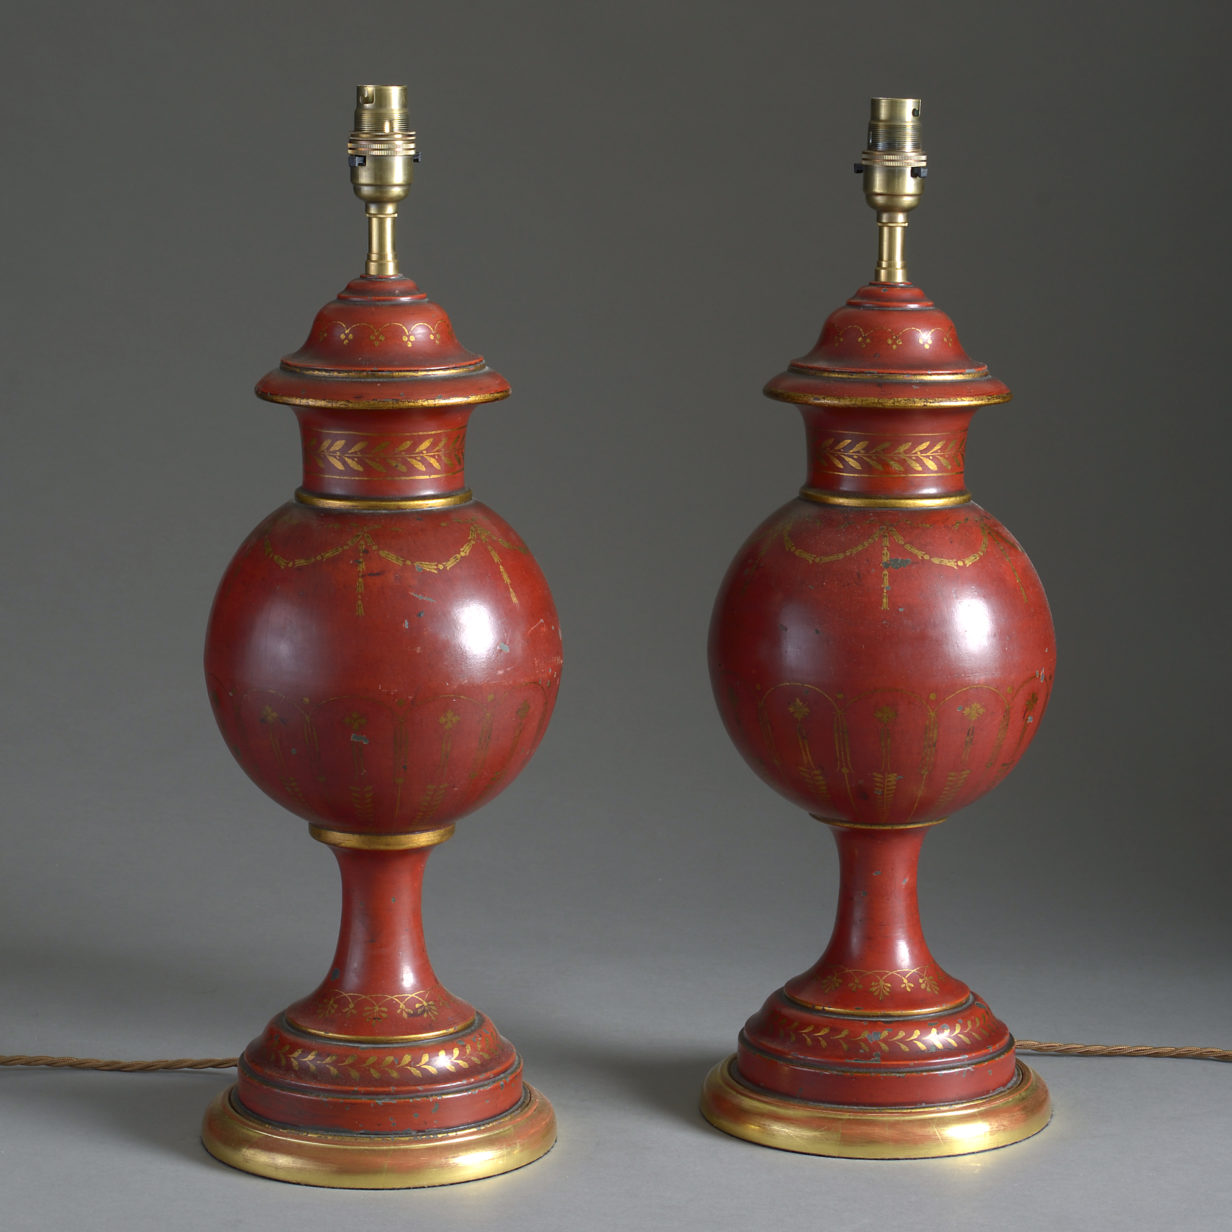 Pair of red & gilded tole vase lamps